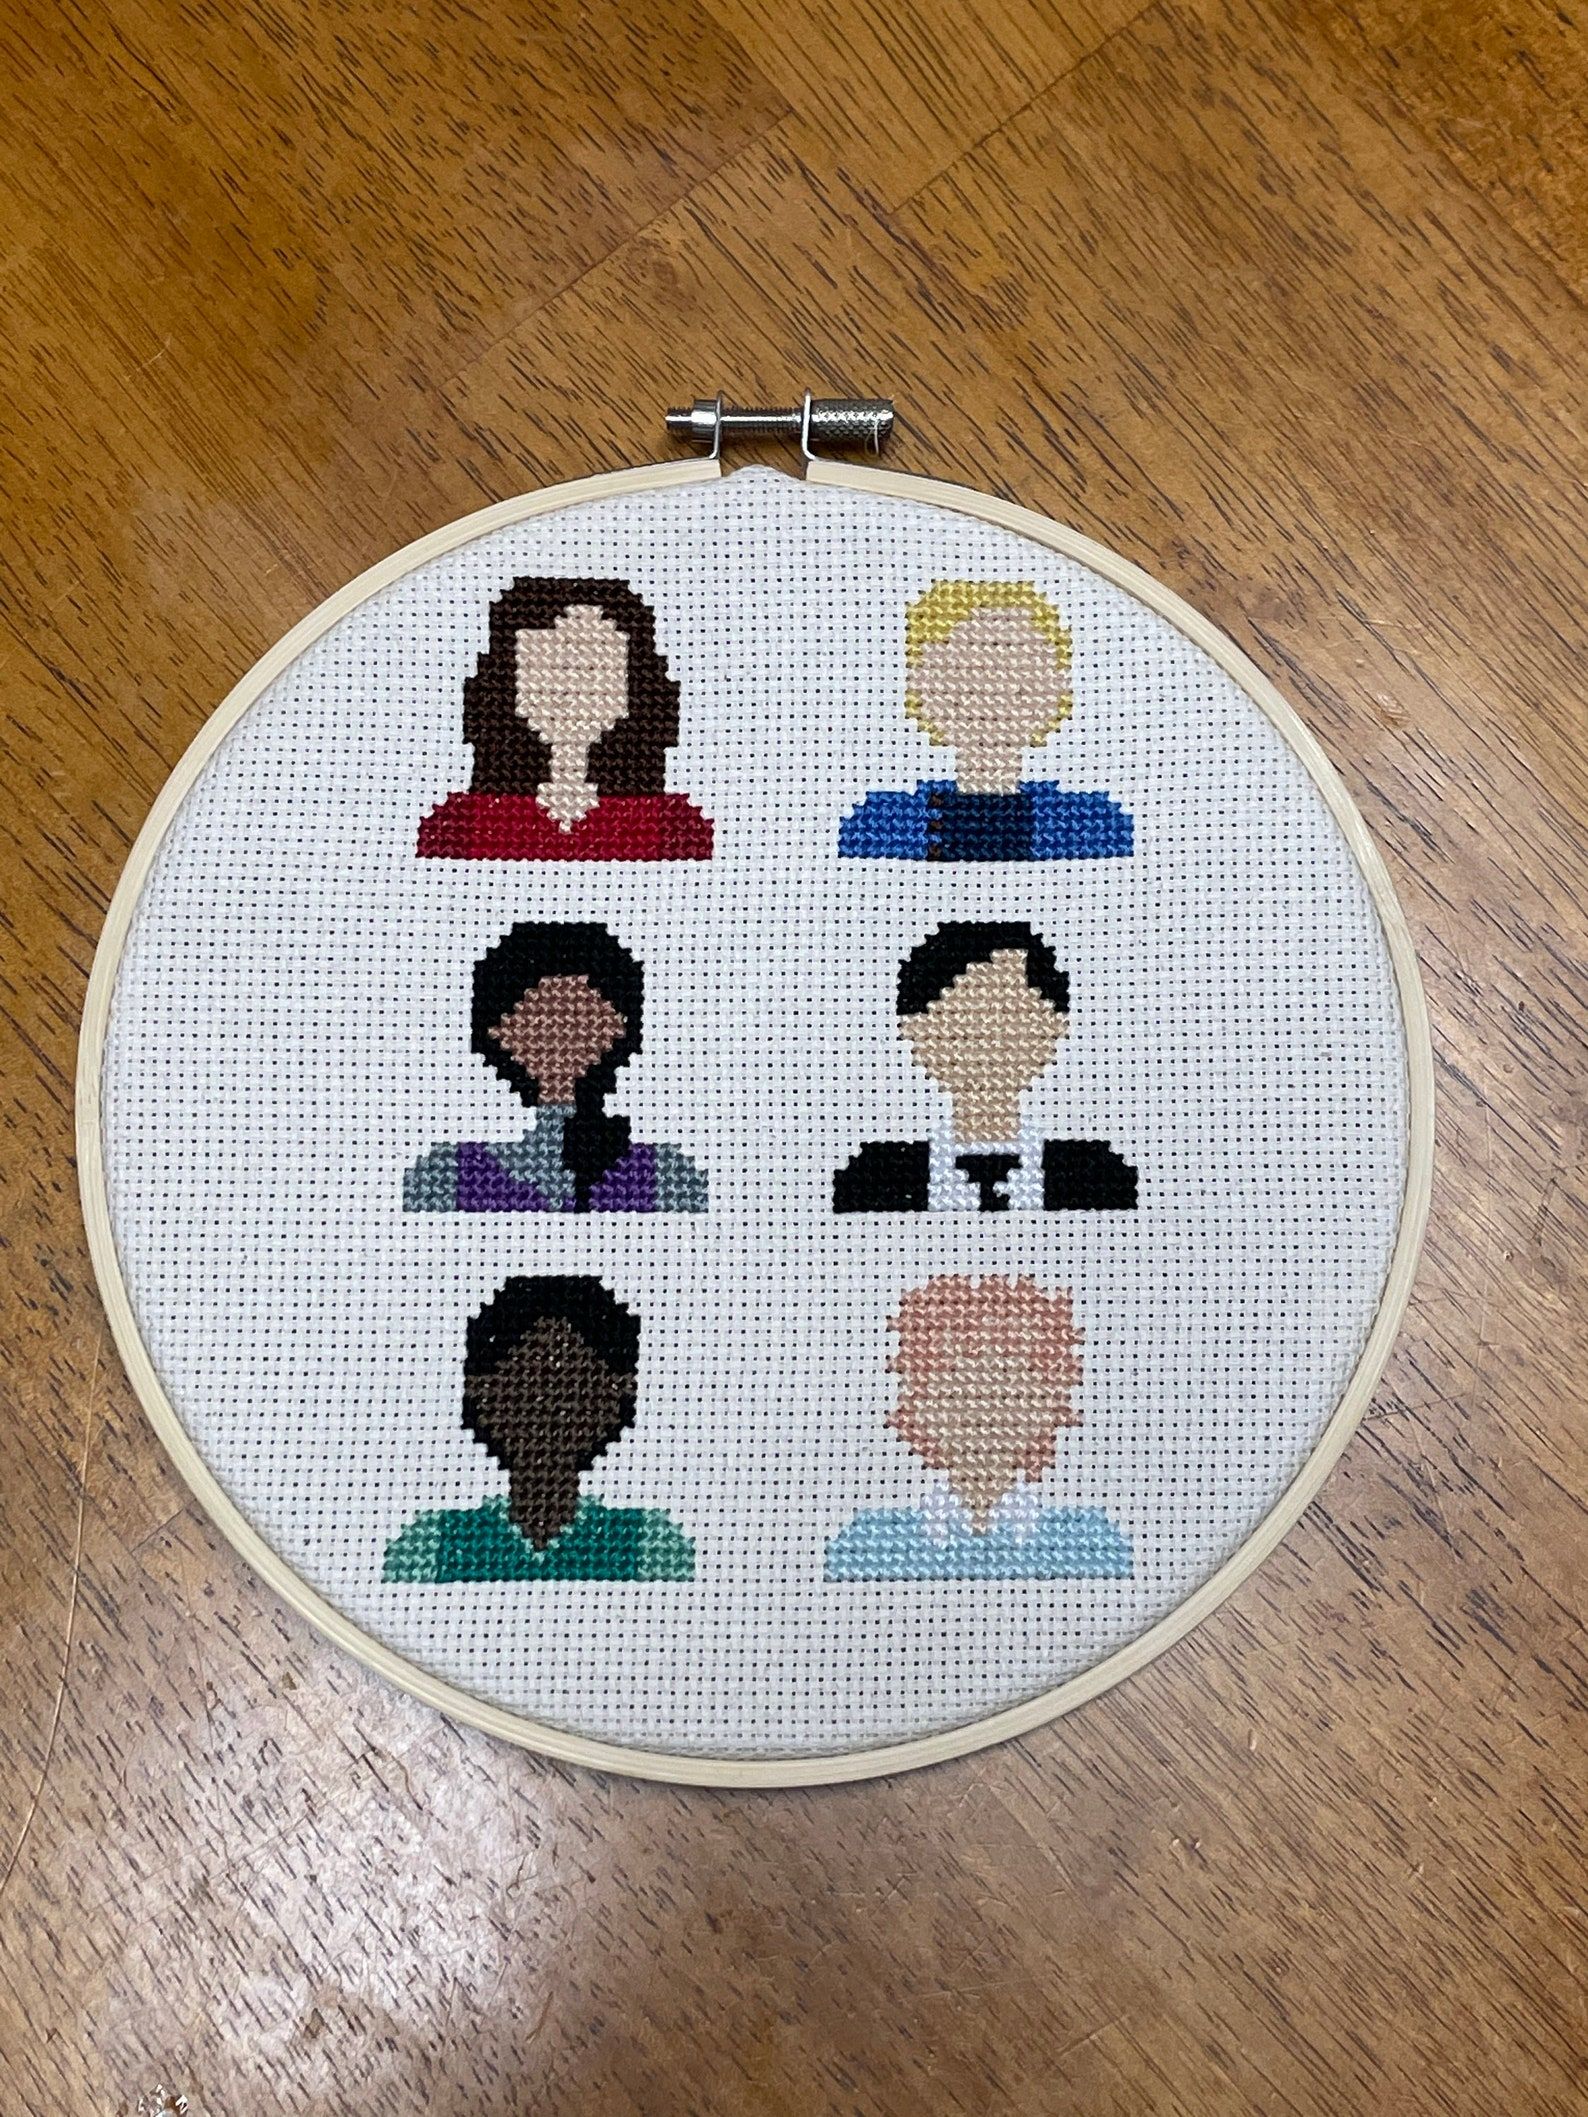 A circular hoop featuring the six protagonists of Six of Crows in cross stitch